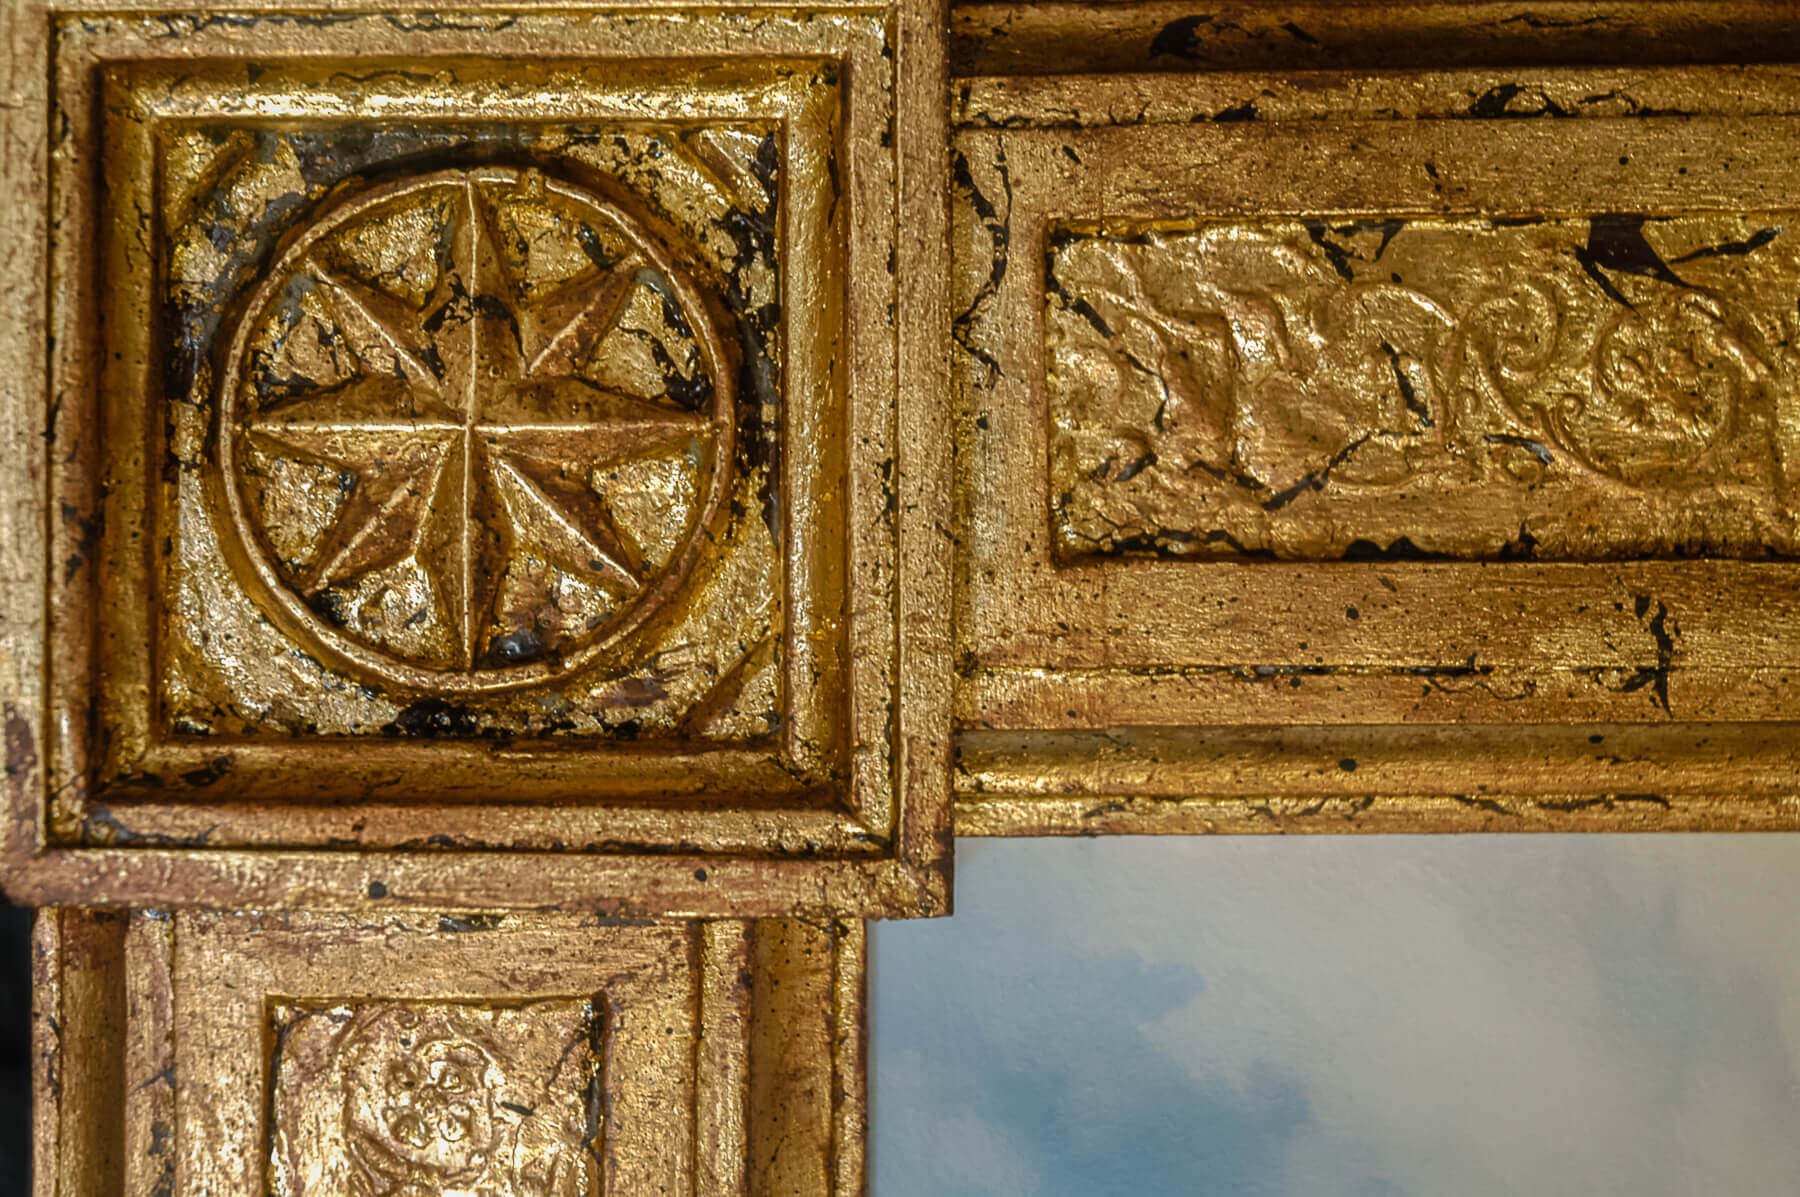 This close-up of one of the frame corners shows the hand-done gilding, antiquing, and finishing that...